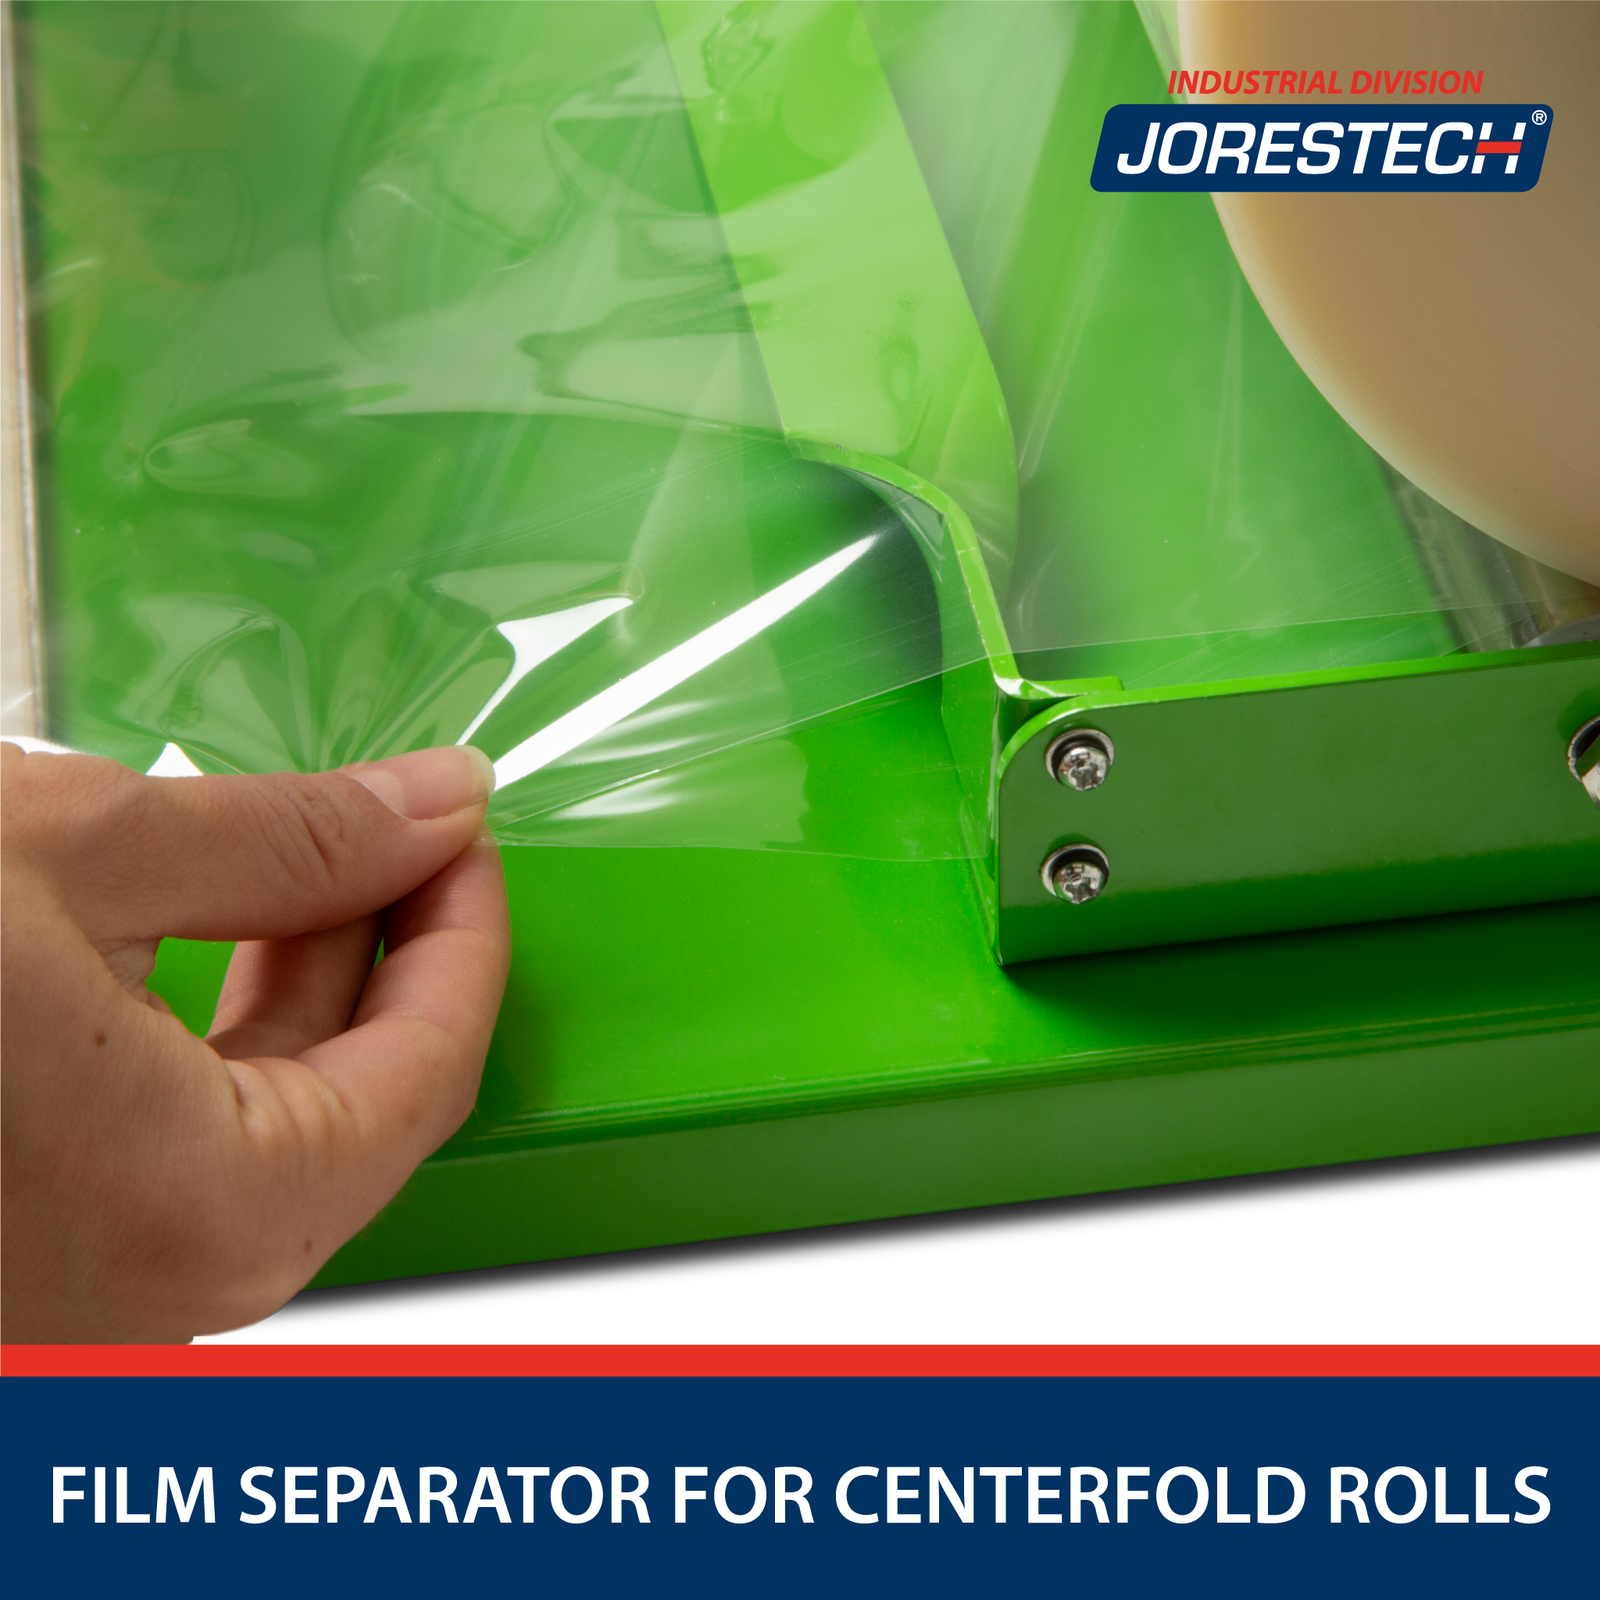 Hand pulling shrink film from a centerfold shrink roll. Detail shows how the film separating arm keeps both sides of the film neatly separated from each other for an easier packaging experience. Bottom text reads “Film Separator for Centerfold Rolls”. 